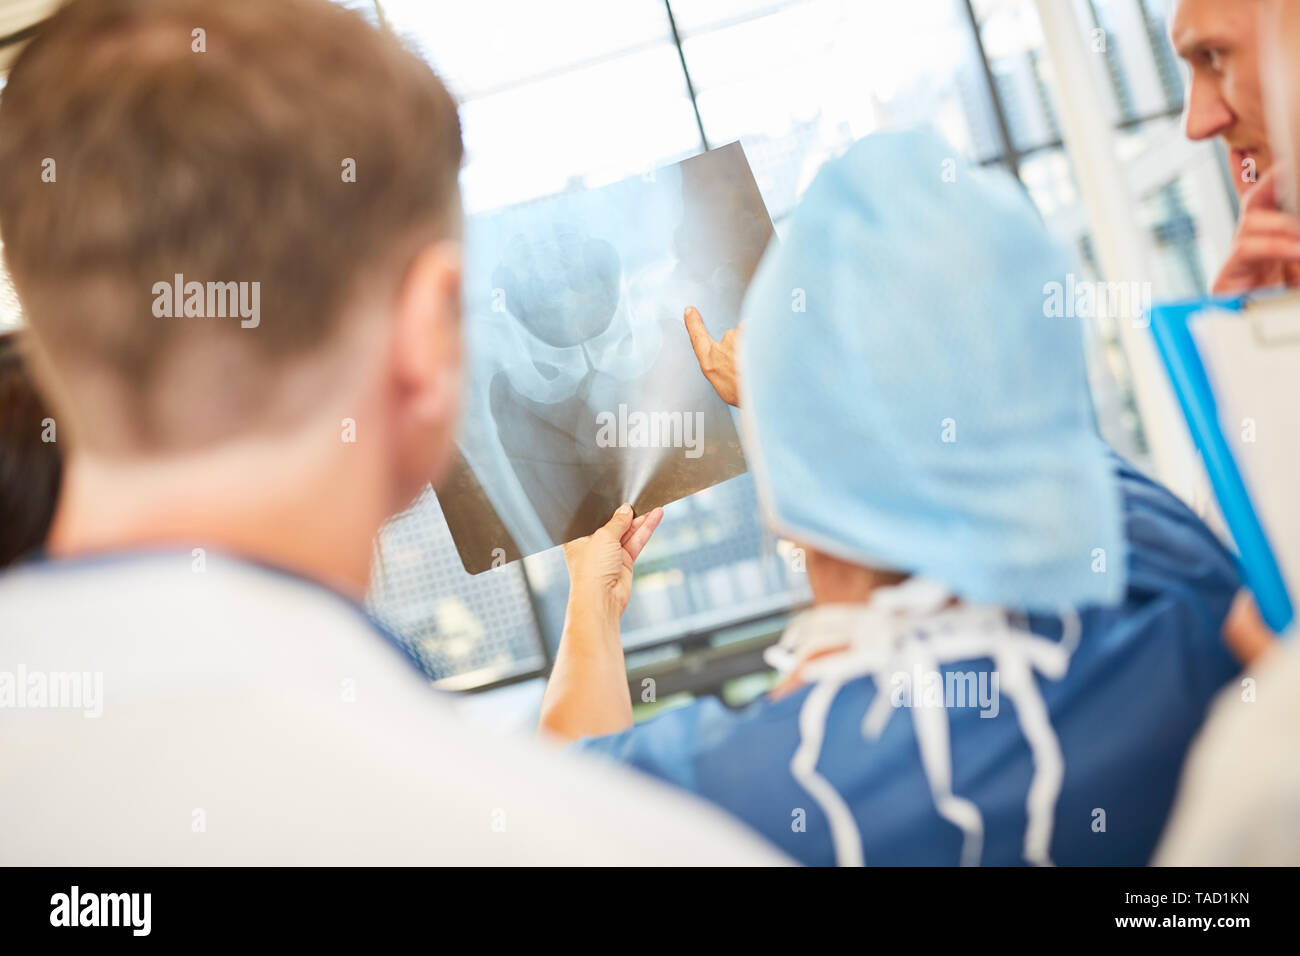 Medical team in radiology diagnostics looks at an x-ray together Stock Photo